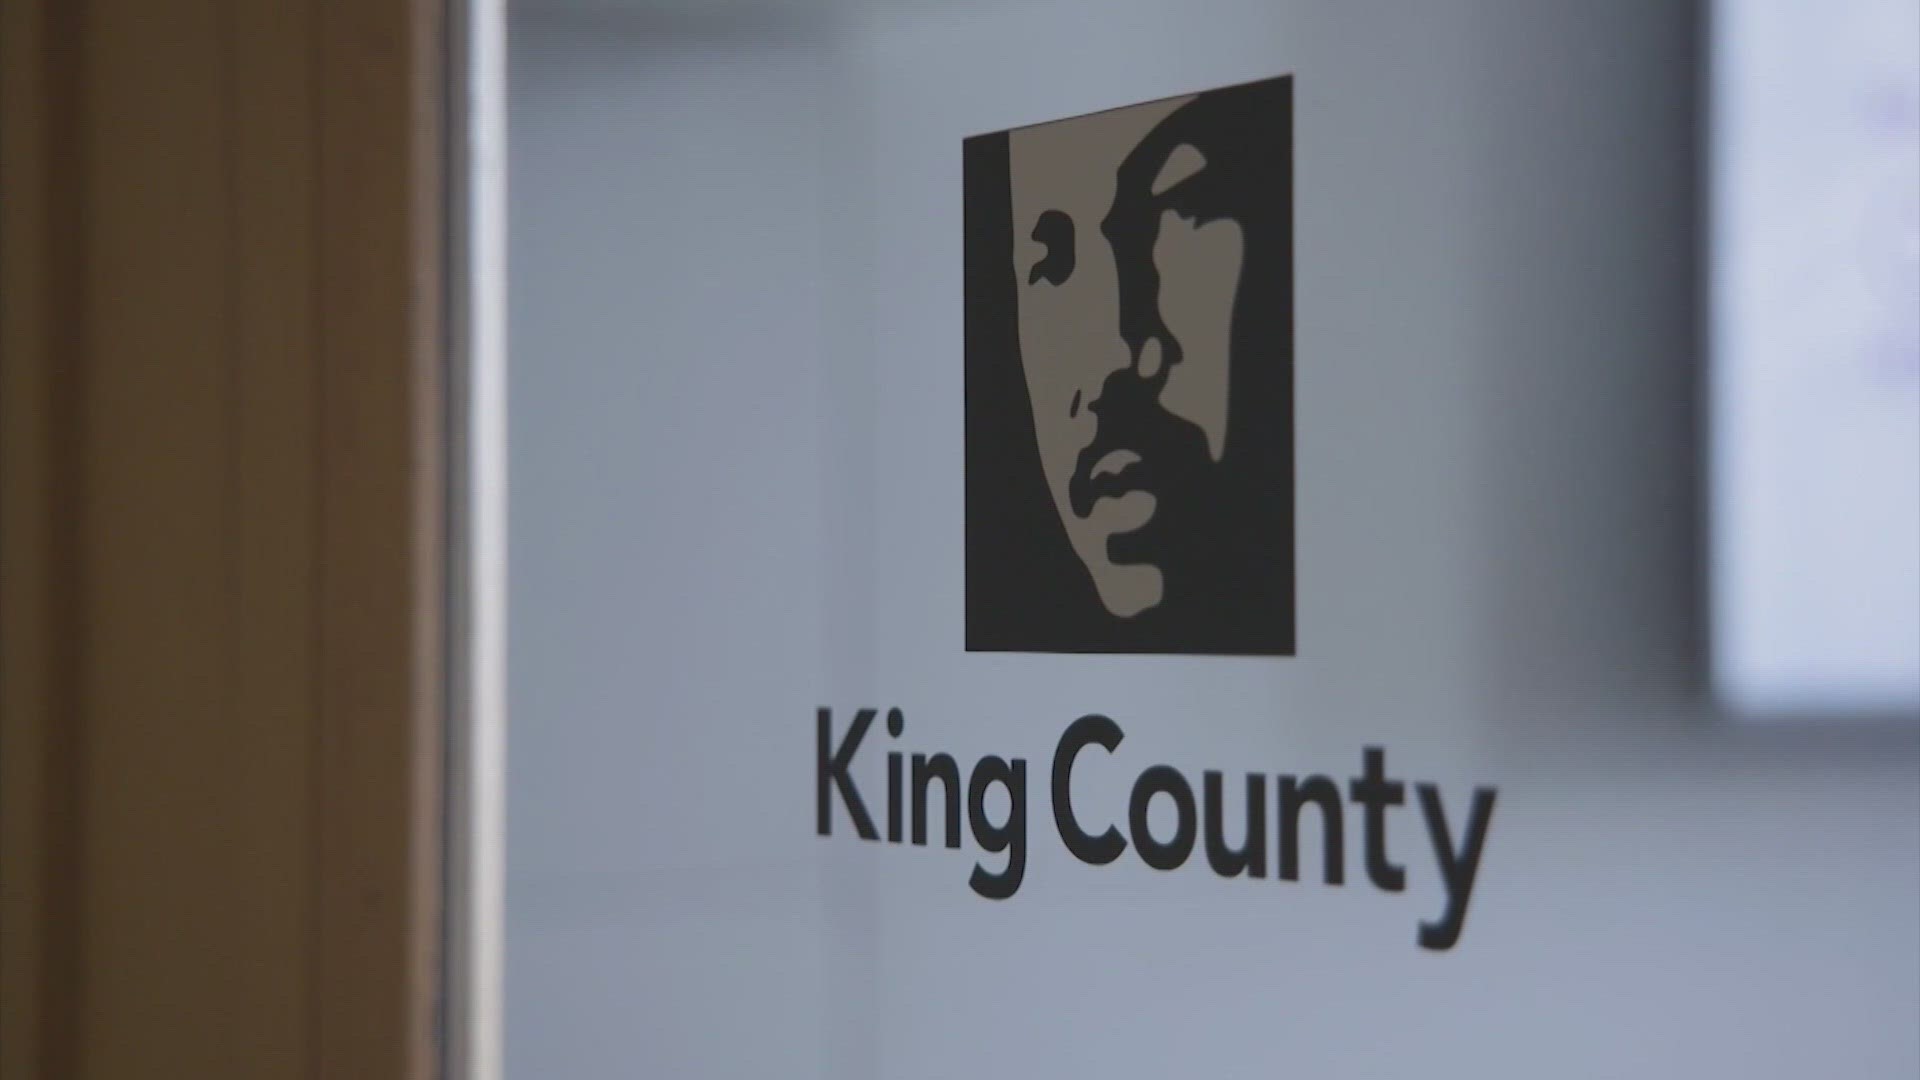 The King County Council on Wednesday will consider "fast-tracking" the re-hiring of employees who were fired for declining the COVID-19 vaccine.